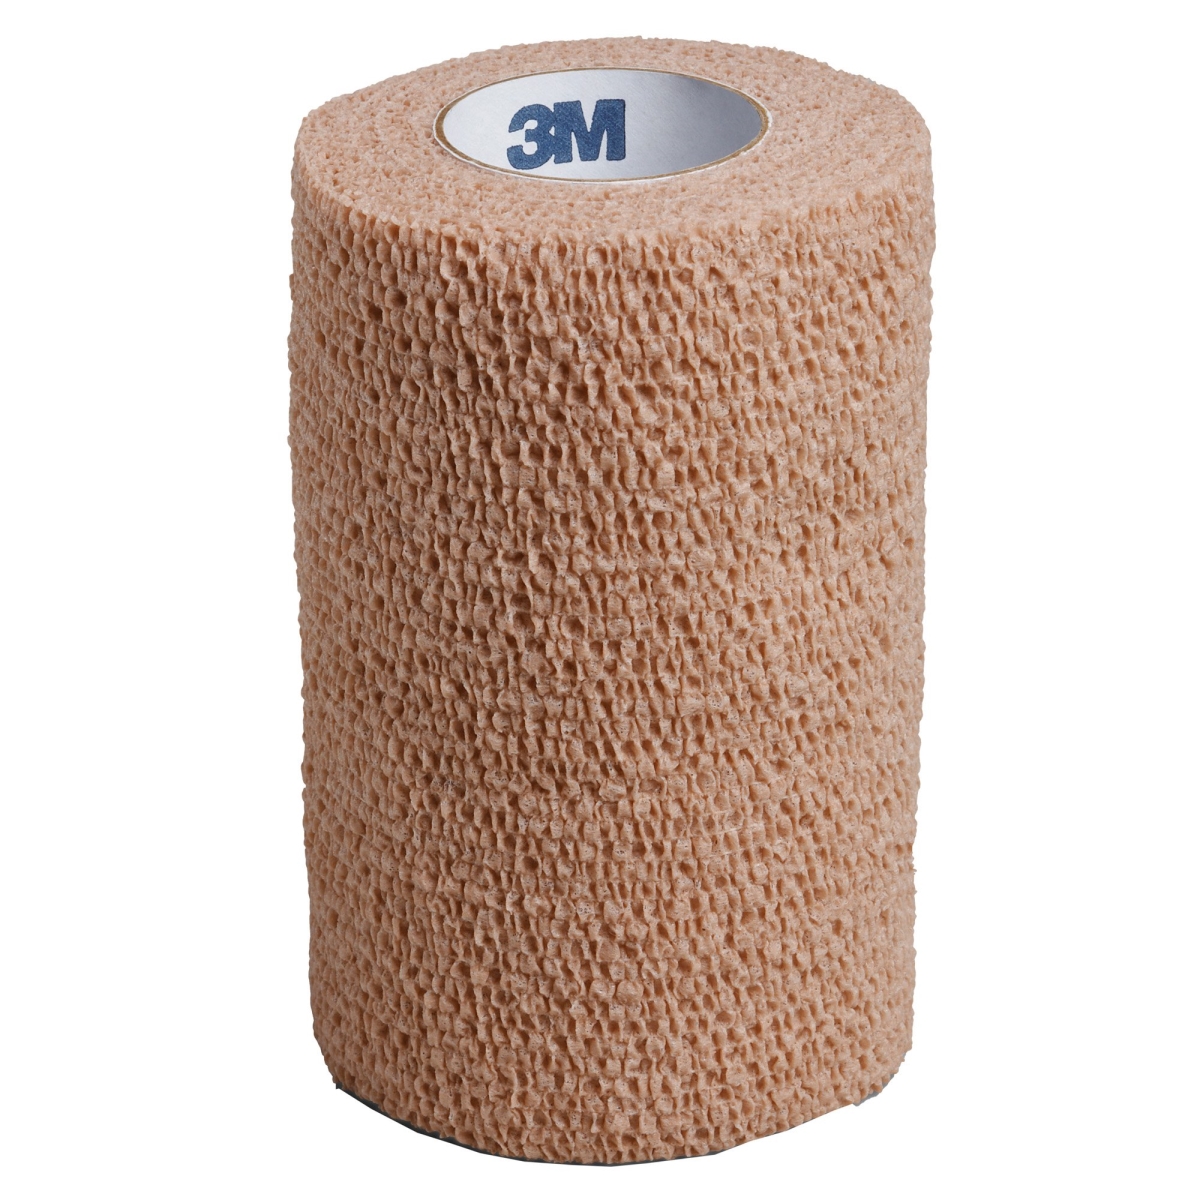 Picture of 3M 15842018 Tan Coban Nonsterile Cohesive Bandage&#44; 4 in. x 5 yardss - Pack of 18